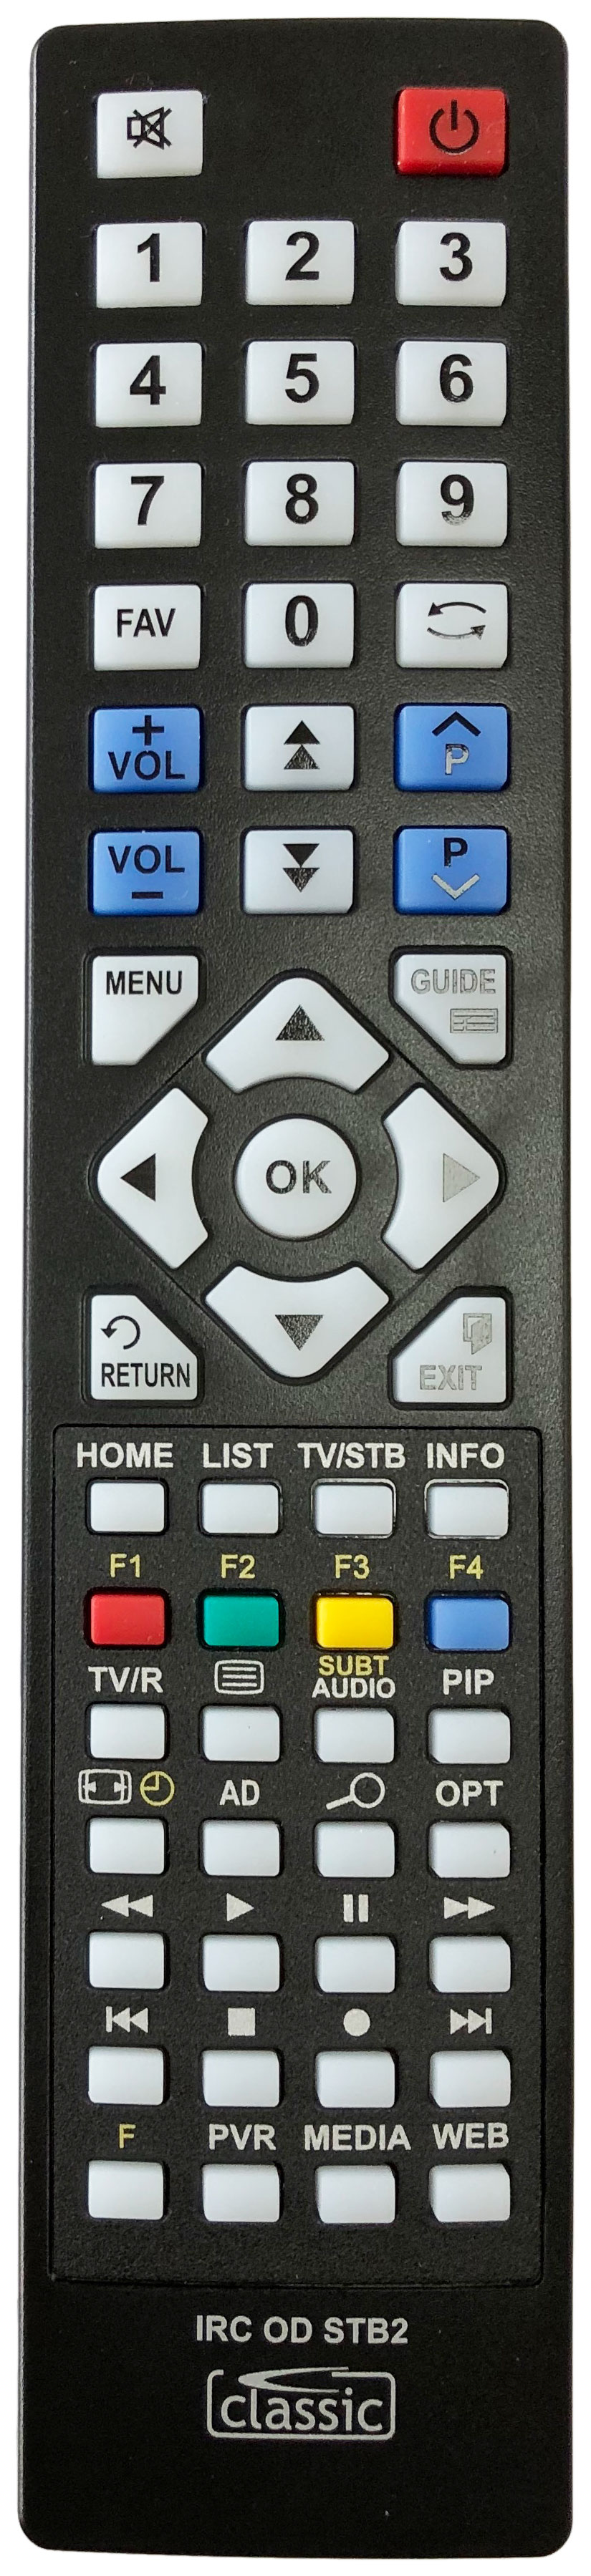 YOUVIEW DN371T Remote Control